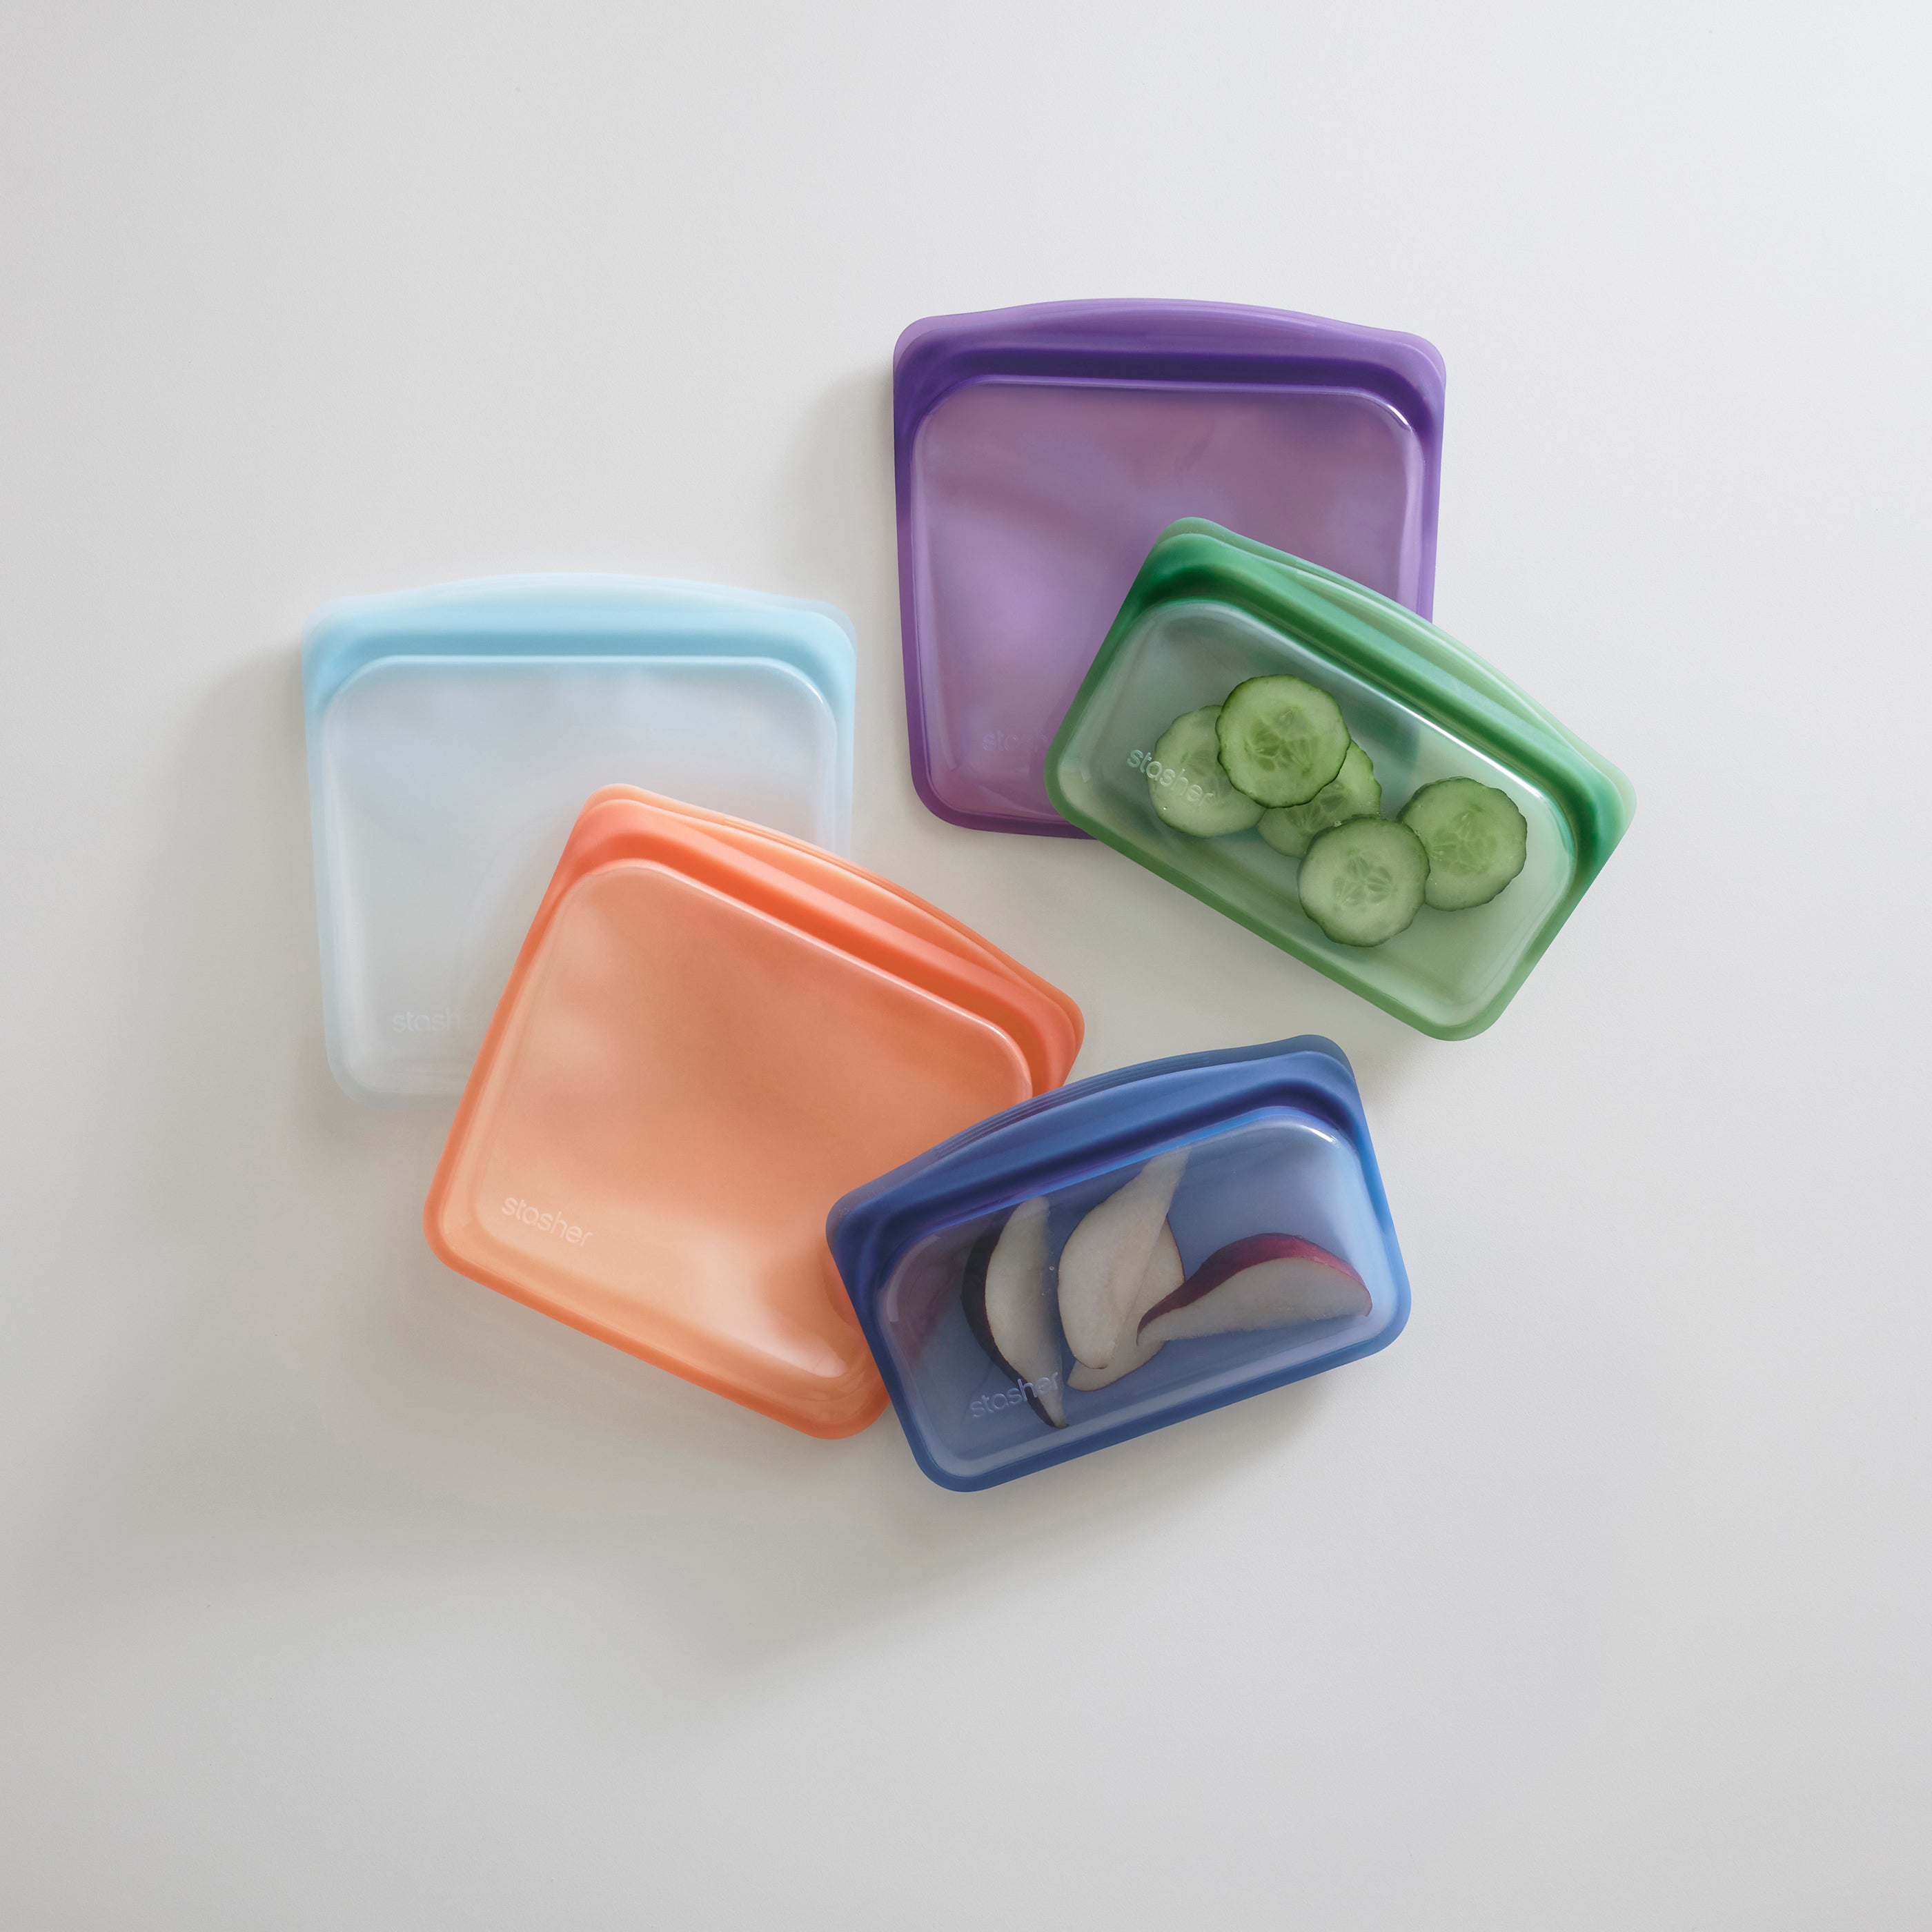 Ziploc® Endurables™ Small Pouch, 1 Cup, 8 fl Oz, Reusable Silicone, From  Freezer, to Oven, to Table 